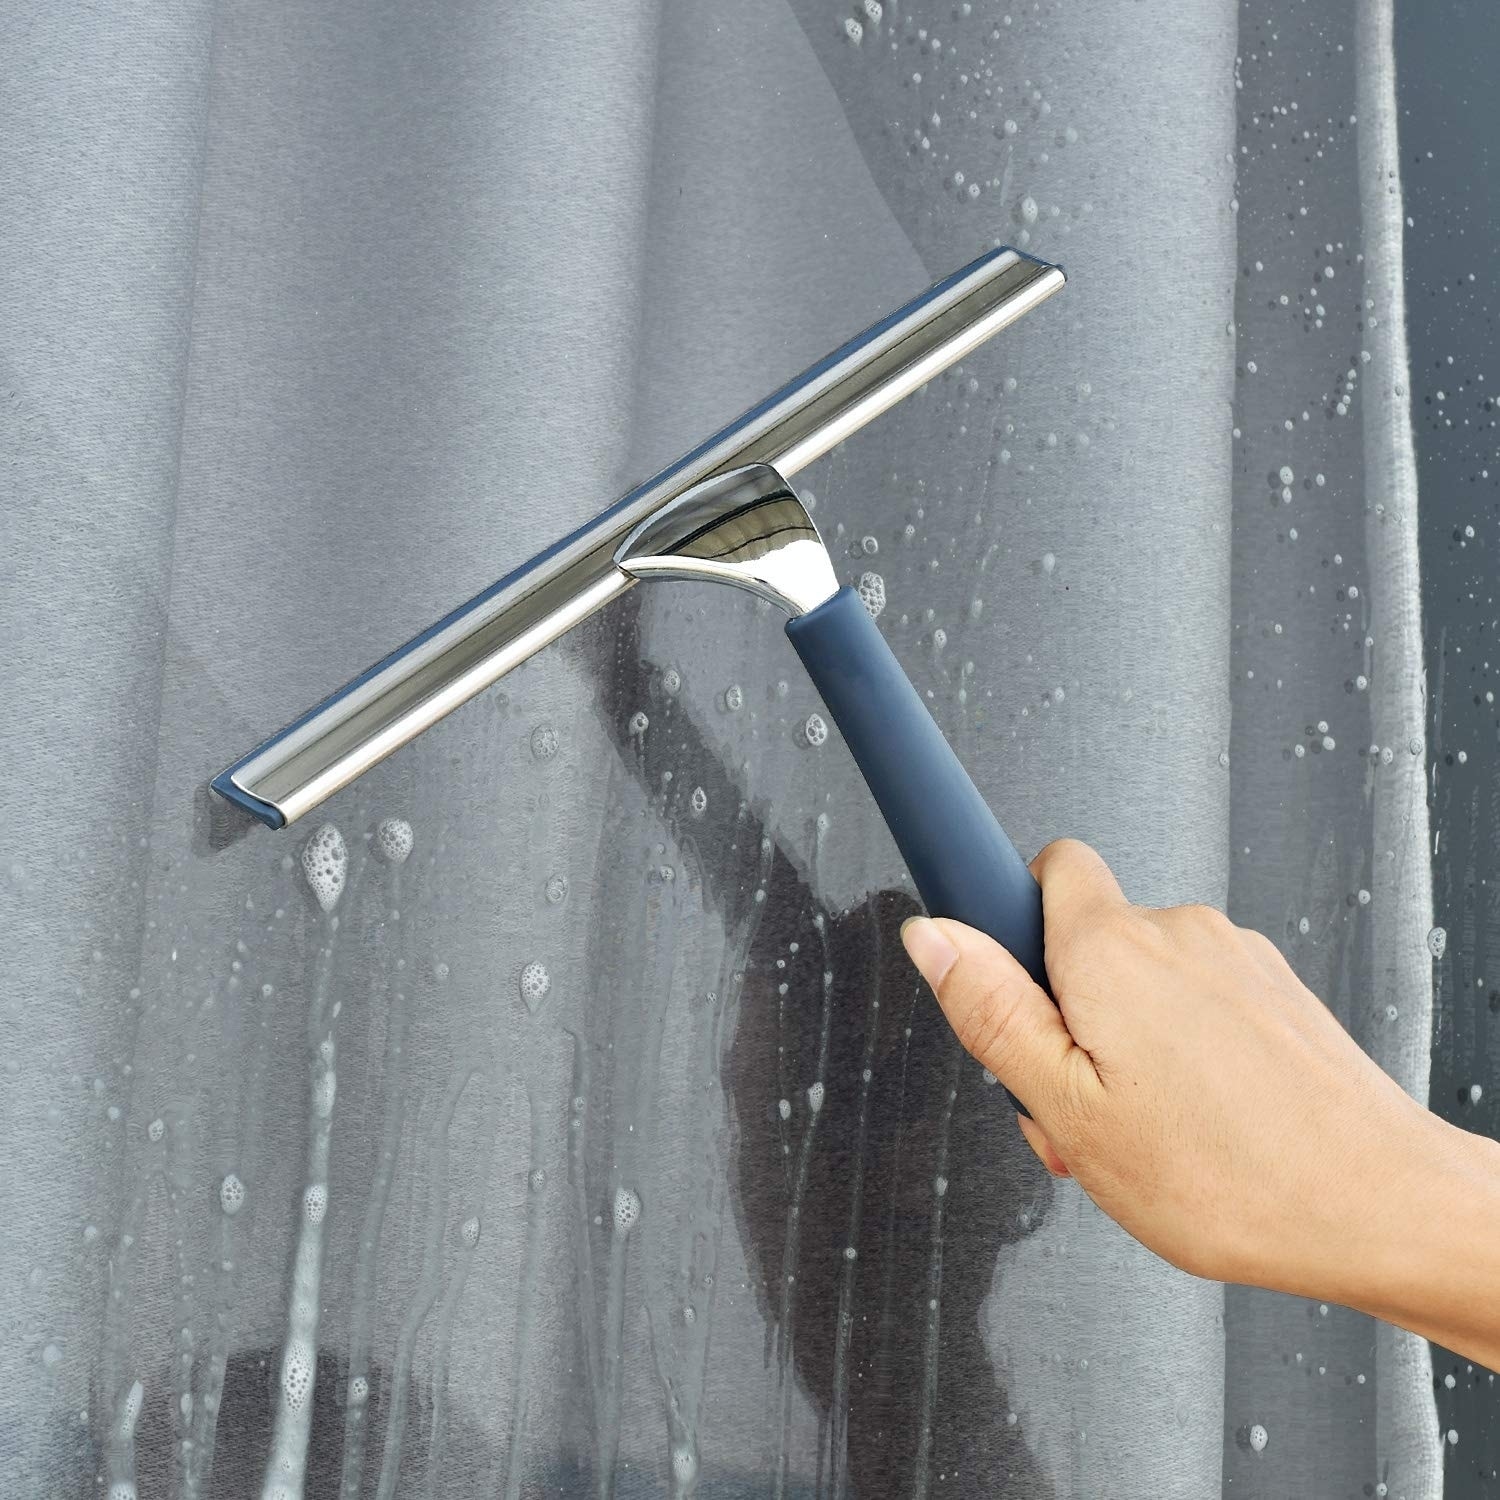 https://ak1.ostkcdn.com/images/products/30084860/ToiletTree-Products-All-Purpose-Stainless-Steel-Squeegee-Rust-Proof-Deluxe-Squeegee-with-Hanging-Hook-Silicone-fc686ea8-0640-4a43-b94e-8be3489cf4b9.jpg